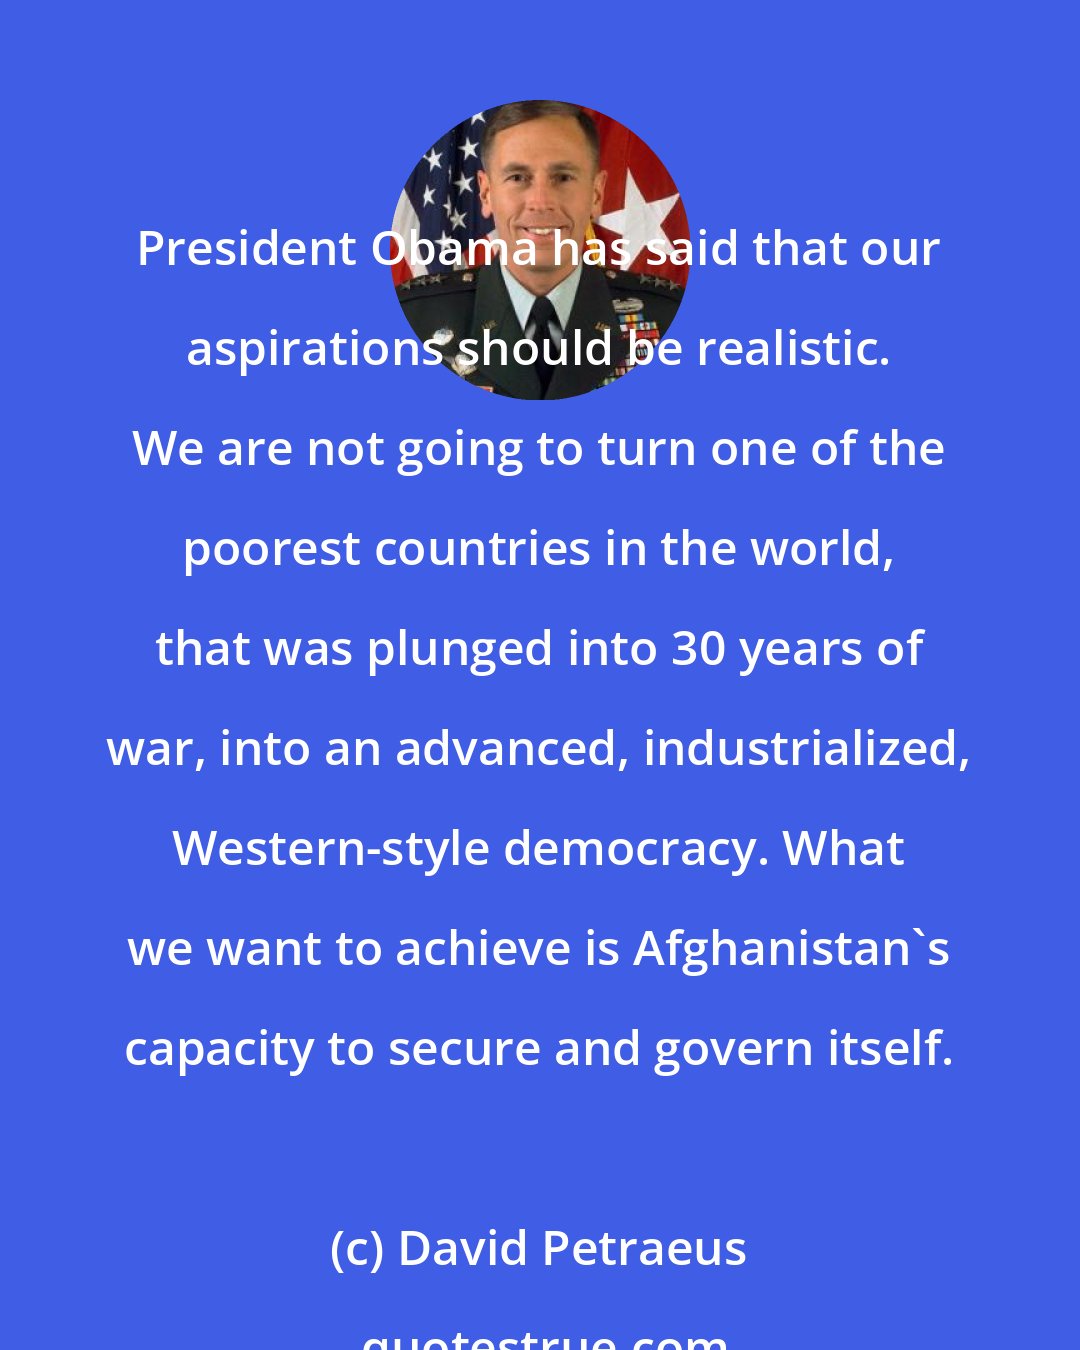 David Petraeus: President Obama has said that our aspirations should be realistic. We are not going to turn one of the poorest countries in the world, that was plunged into 30 years of war, into an advanced, industrialized, Western-style democracy. What we want to achieve is Afghanistan's capacity to secure and govern itself.